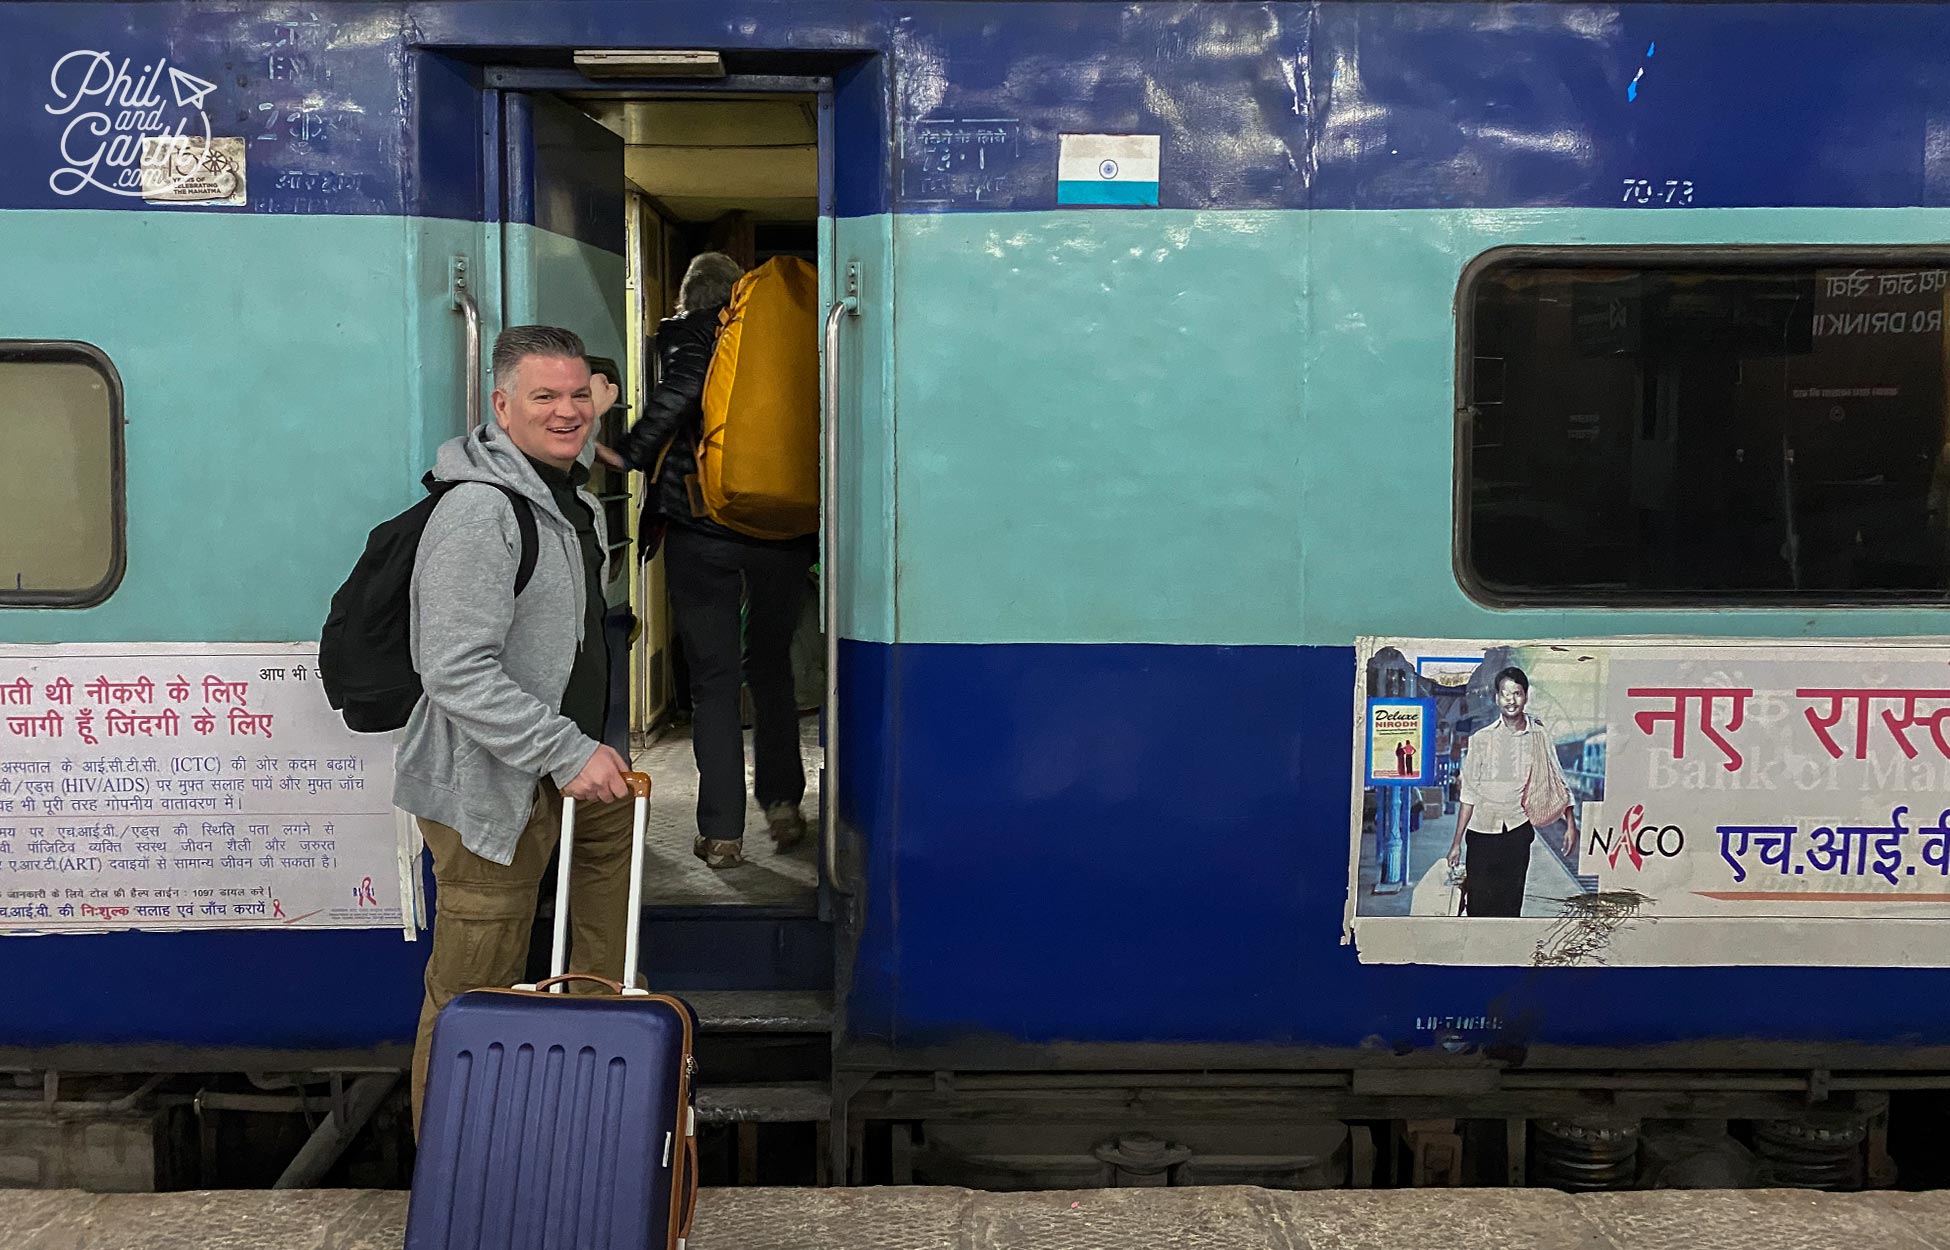 Woo hoo! we're off on our first sleeper train in India